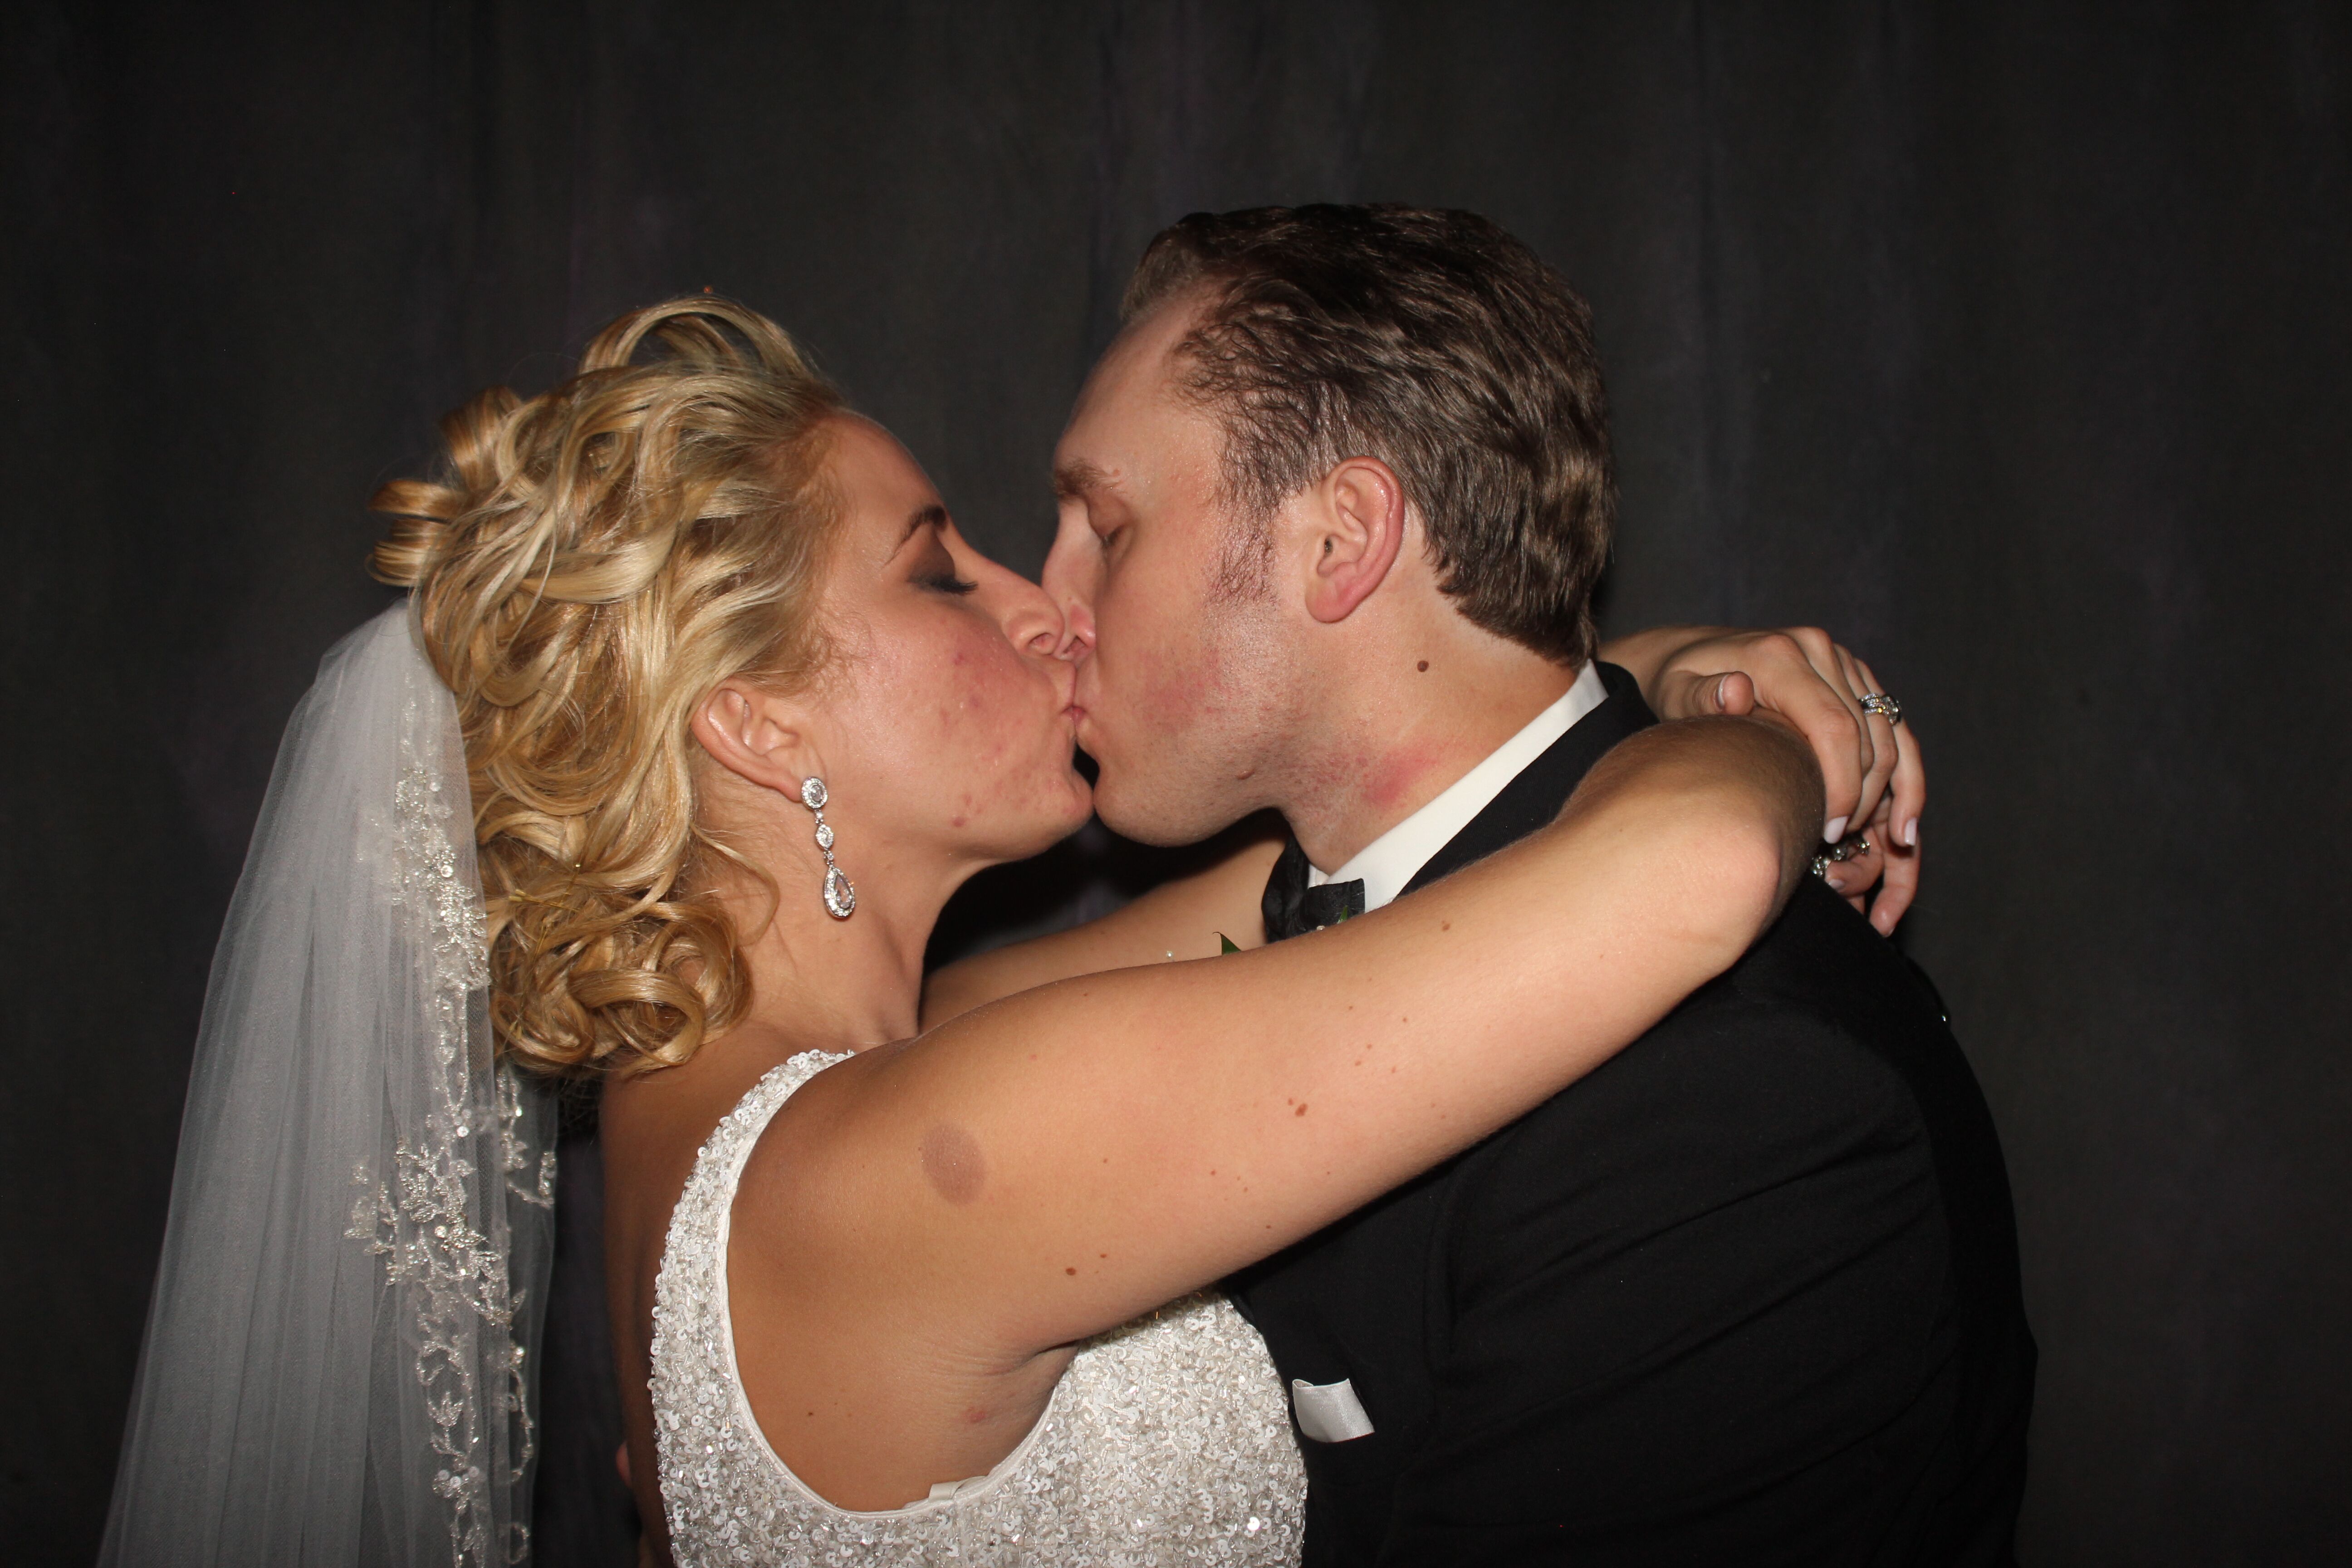 Elite Party Entertainment Photo Booth Rentals Photo Booths The Knot